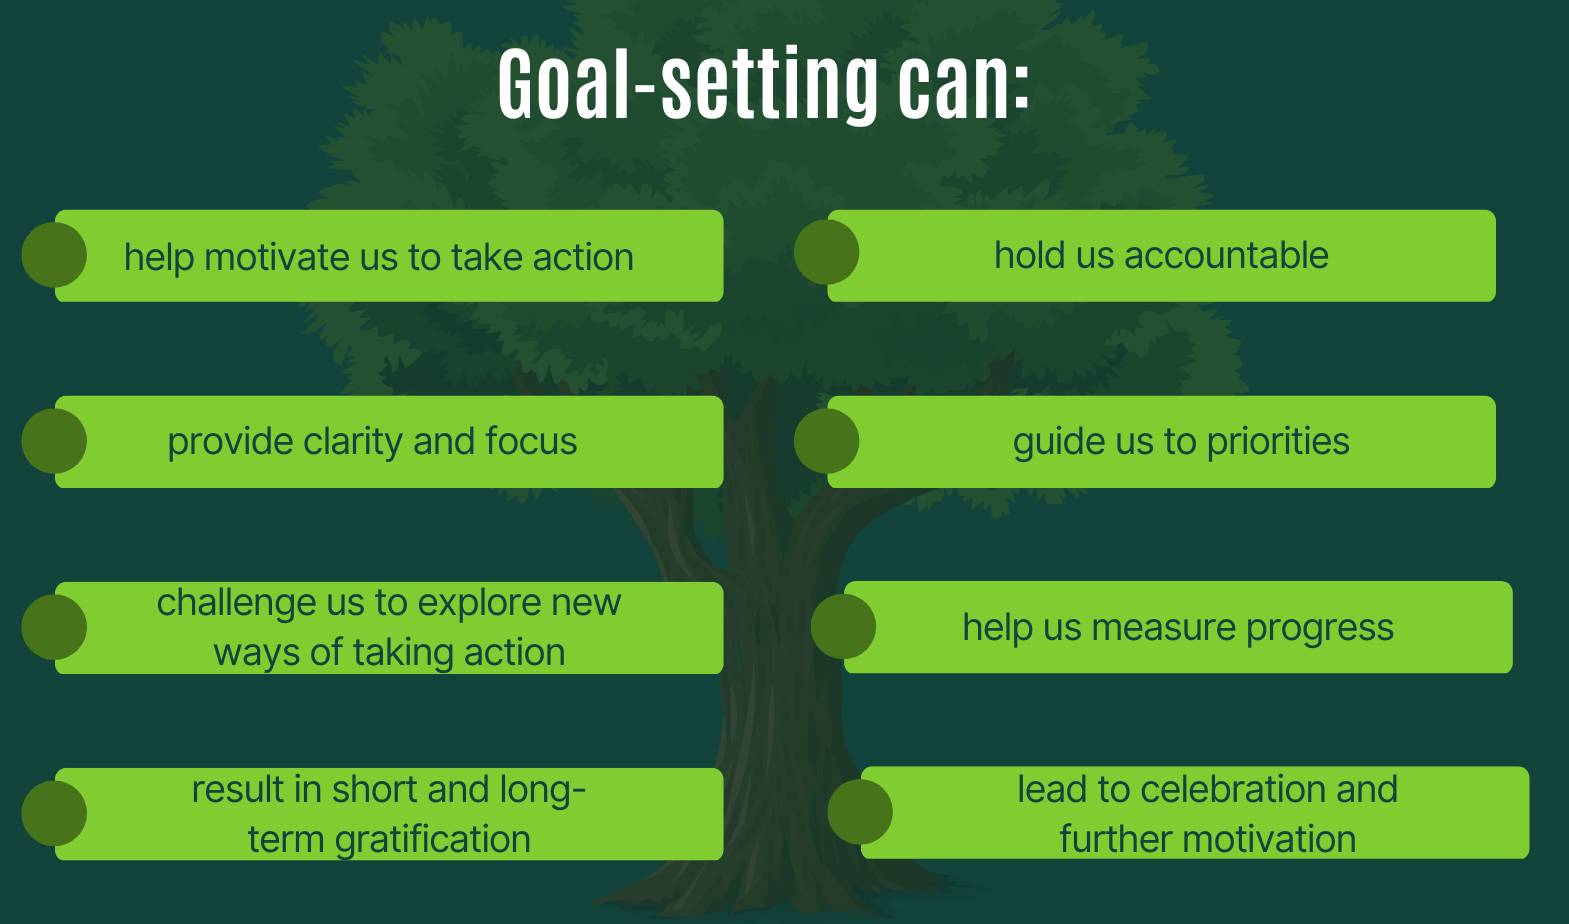 Goal-setting can:  help motivate us to take action  hold us accountable provide clarity and focus  guide us to priorities challenge us to explore new ways of taking action  help us measure progress lead to celebration and further motivation  result in short and long-term gratification 